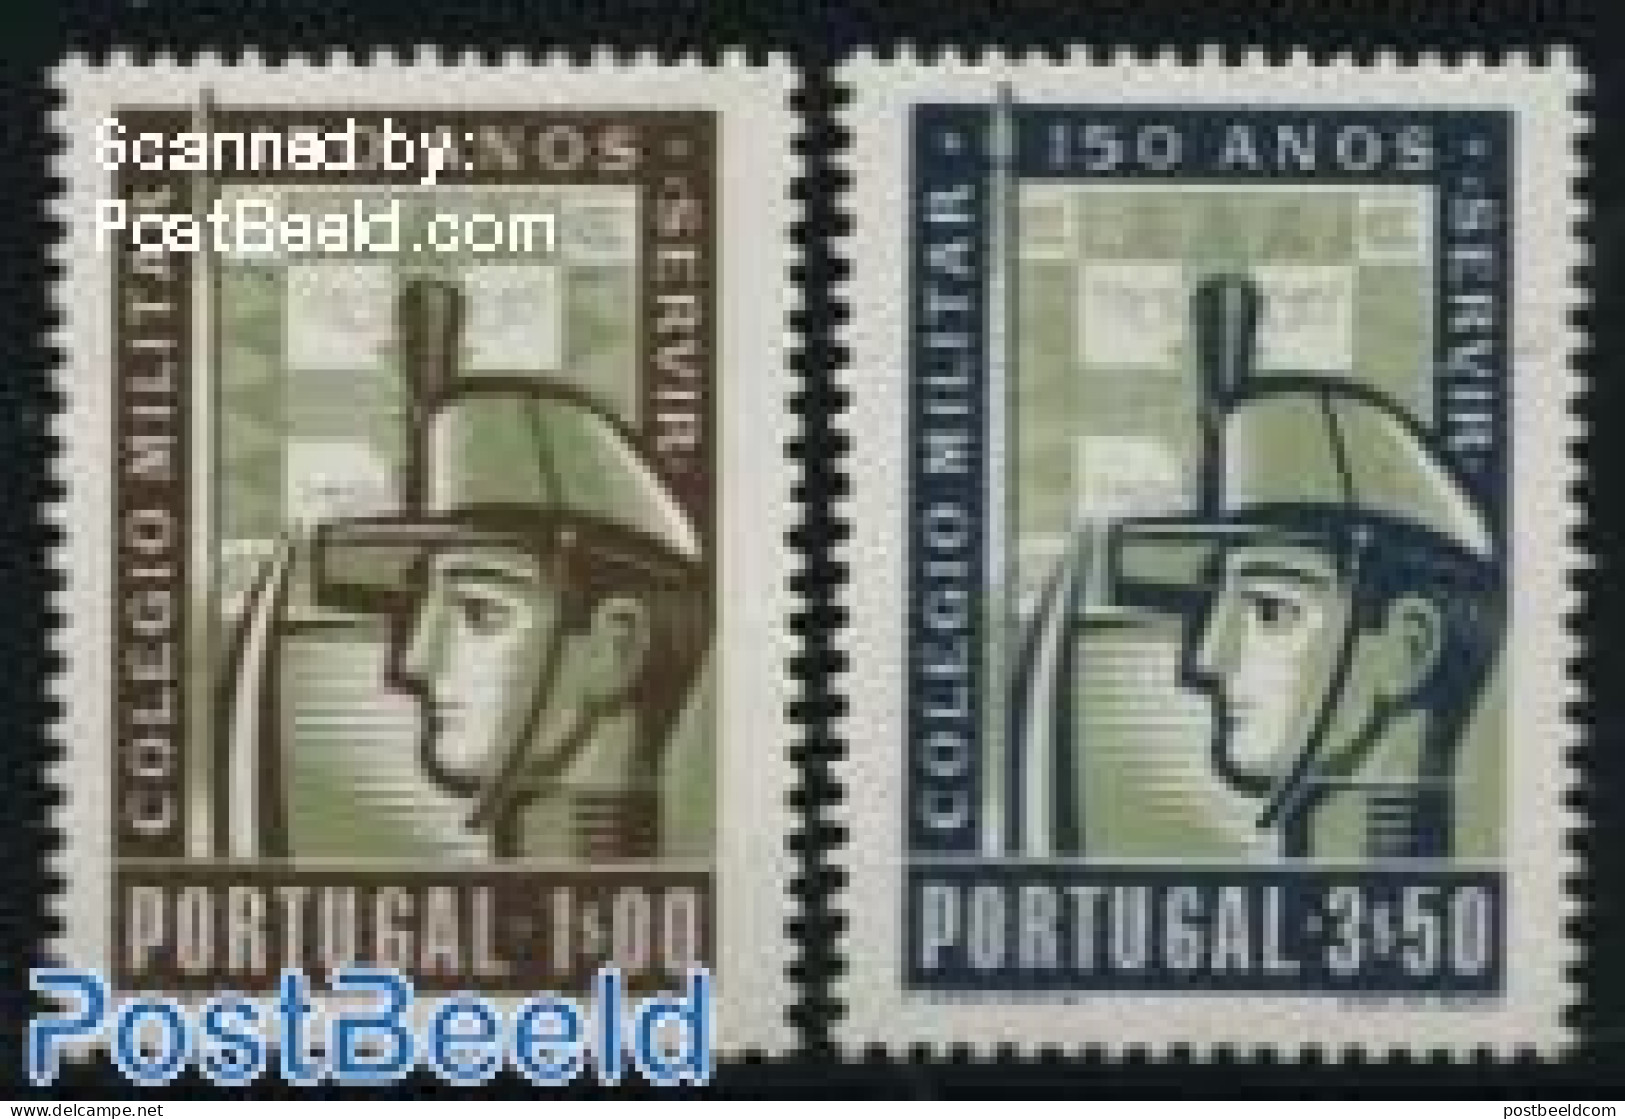 Portugal 1954 Military School 2v, Mint NH, History - Science - Militarism - Education - Neufs